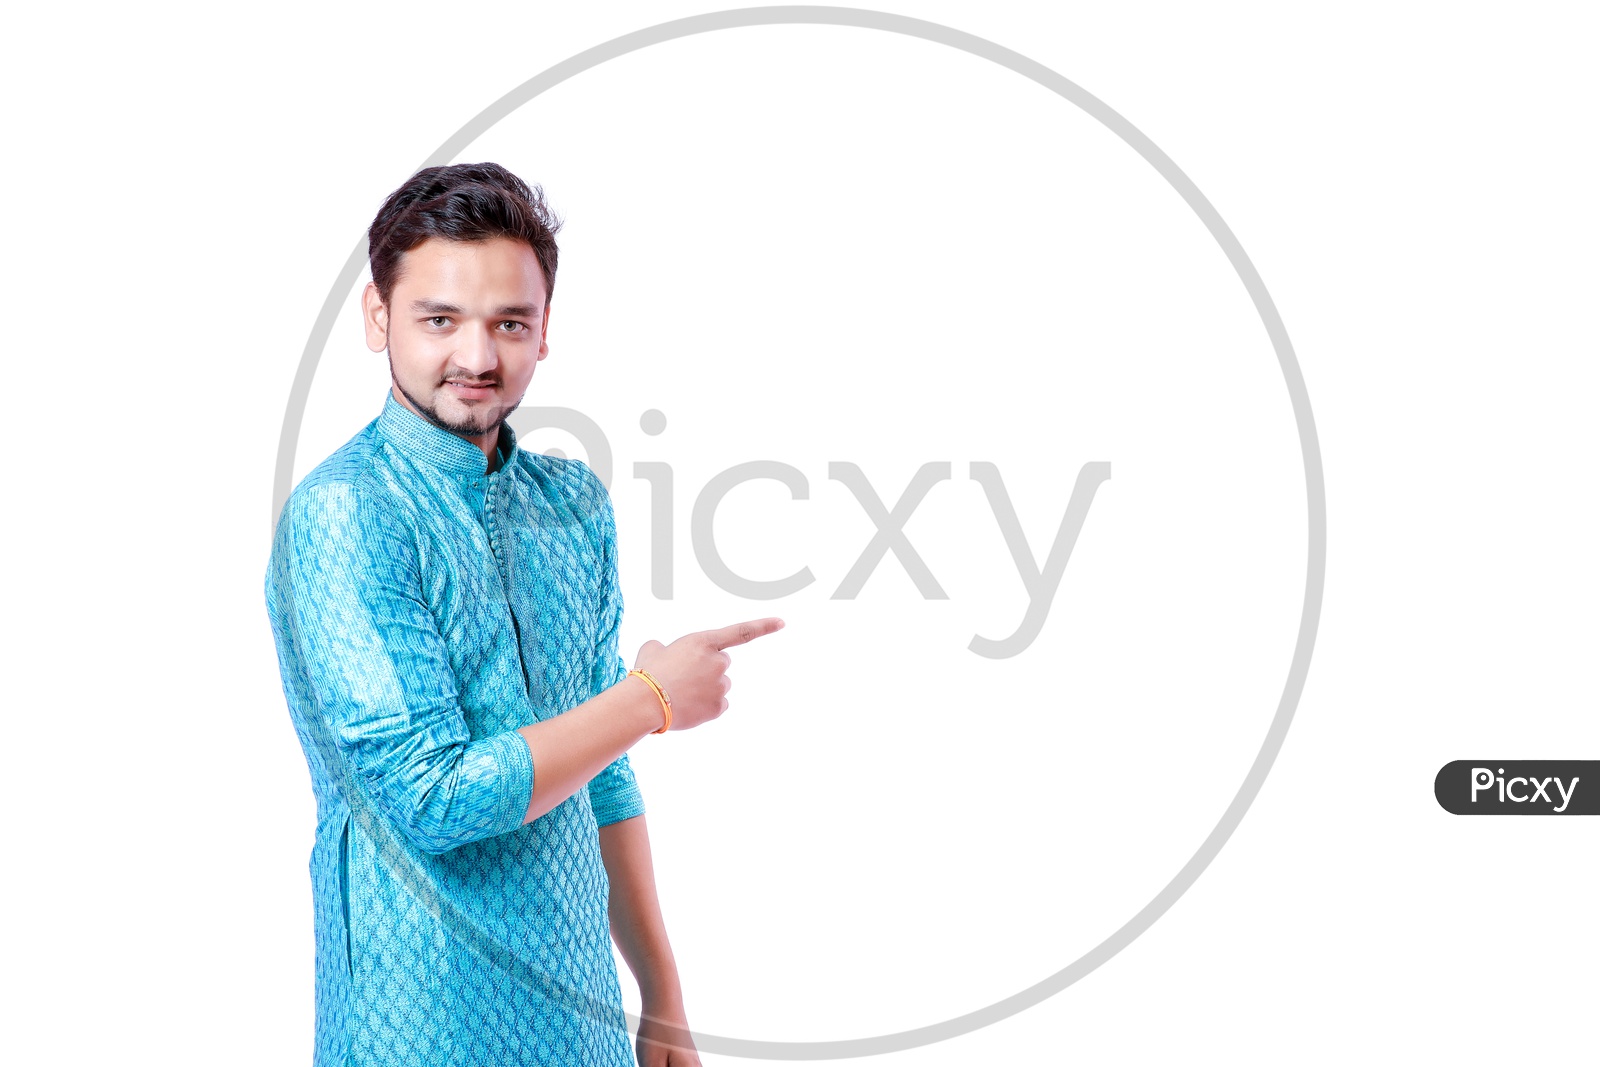 Indian Young Professional Man With a Smiling Face and Doing Gestures  to Space On an Isolated White Background